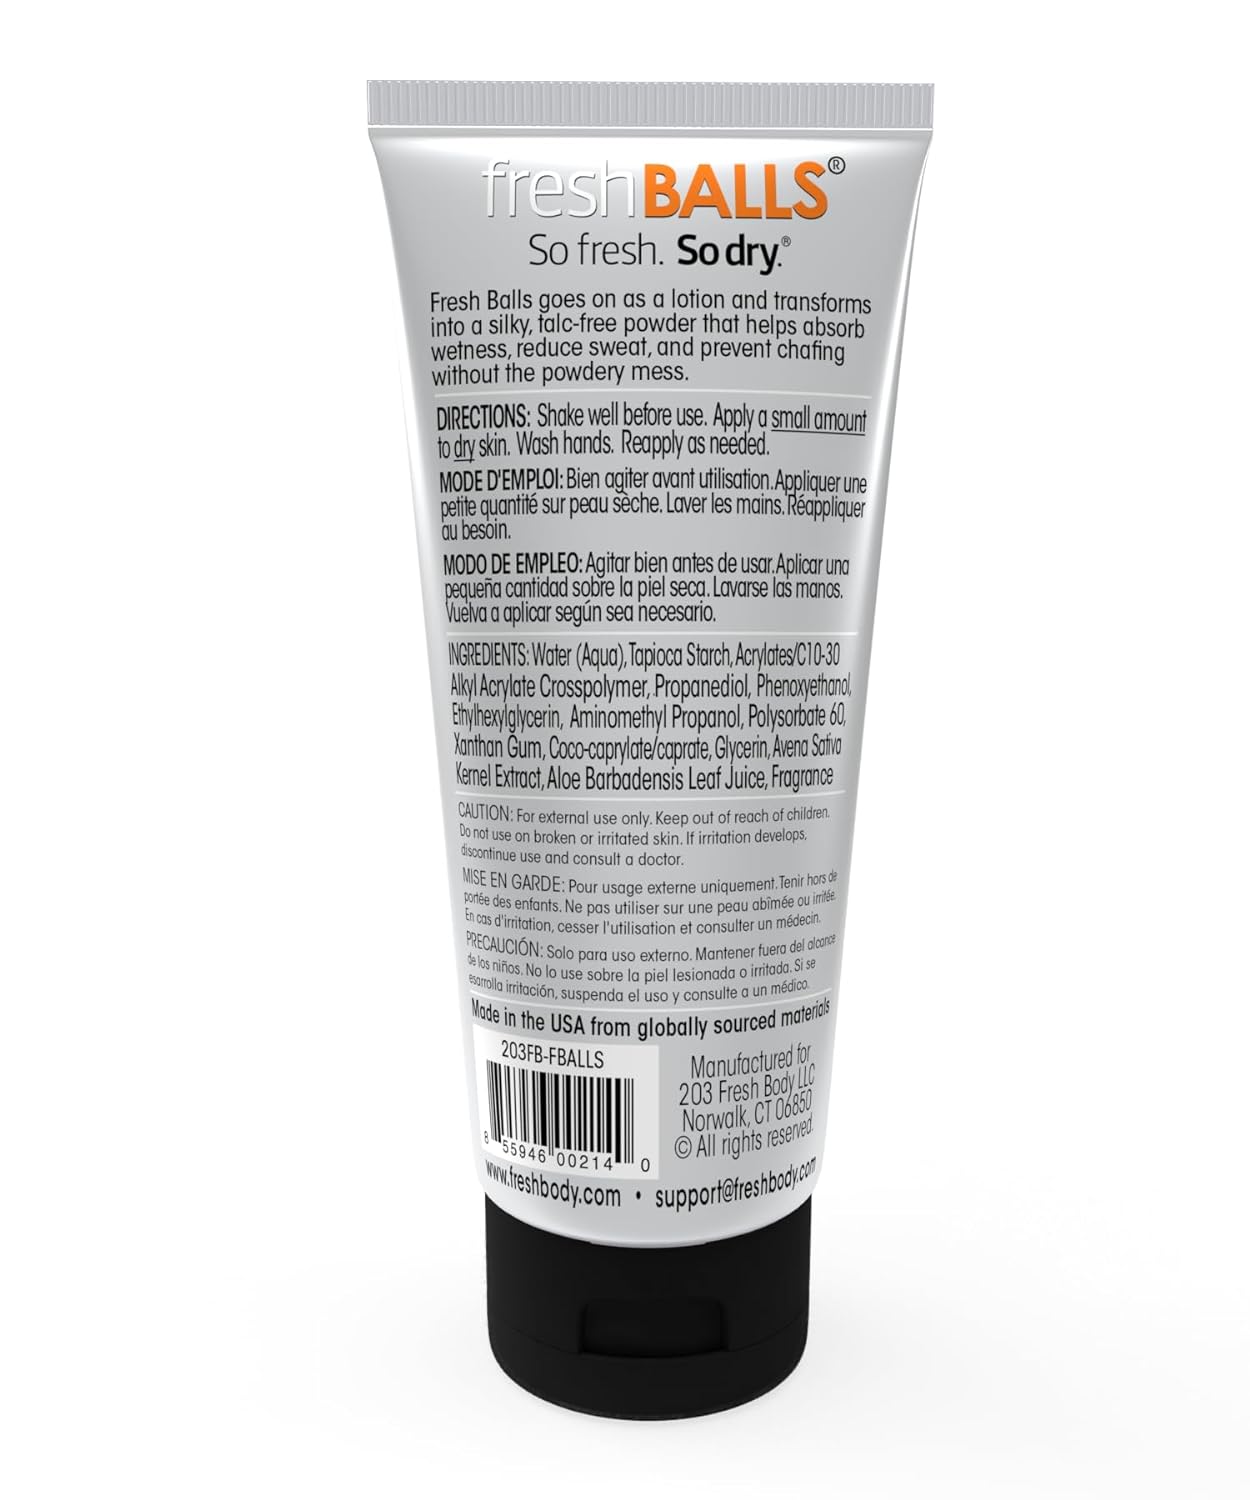 Fresh Body FB - Fresh Balls Anti Chafing Lotion, 3.4oz and 0.07oz On-The-Go Travel Size Packet (15 Pack) - Chafing Cream to Powder Ball Deodorant for Men - Aluminum-Free, Talc-Free : Beauty & Personal Care